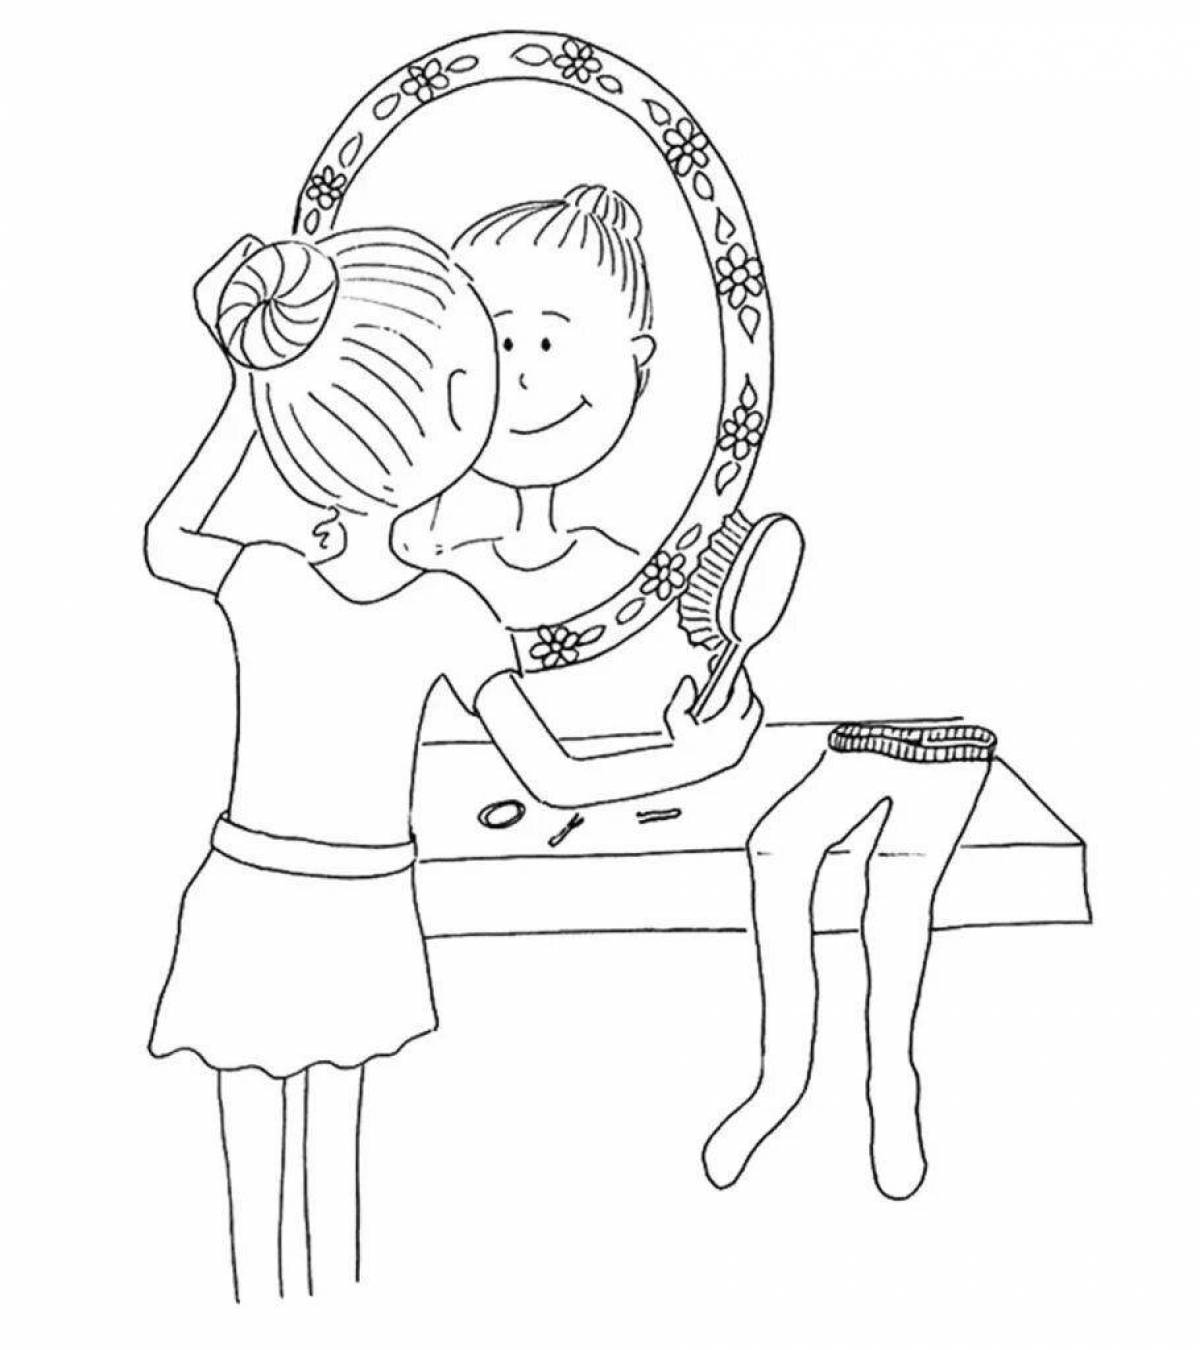 Fun hairdressing coloring book for kids